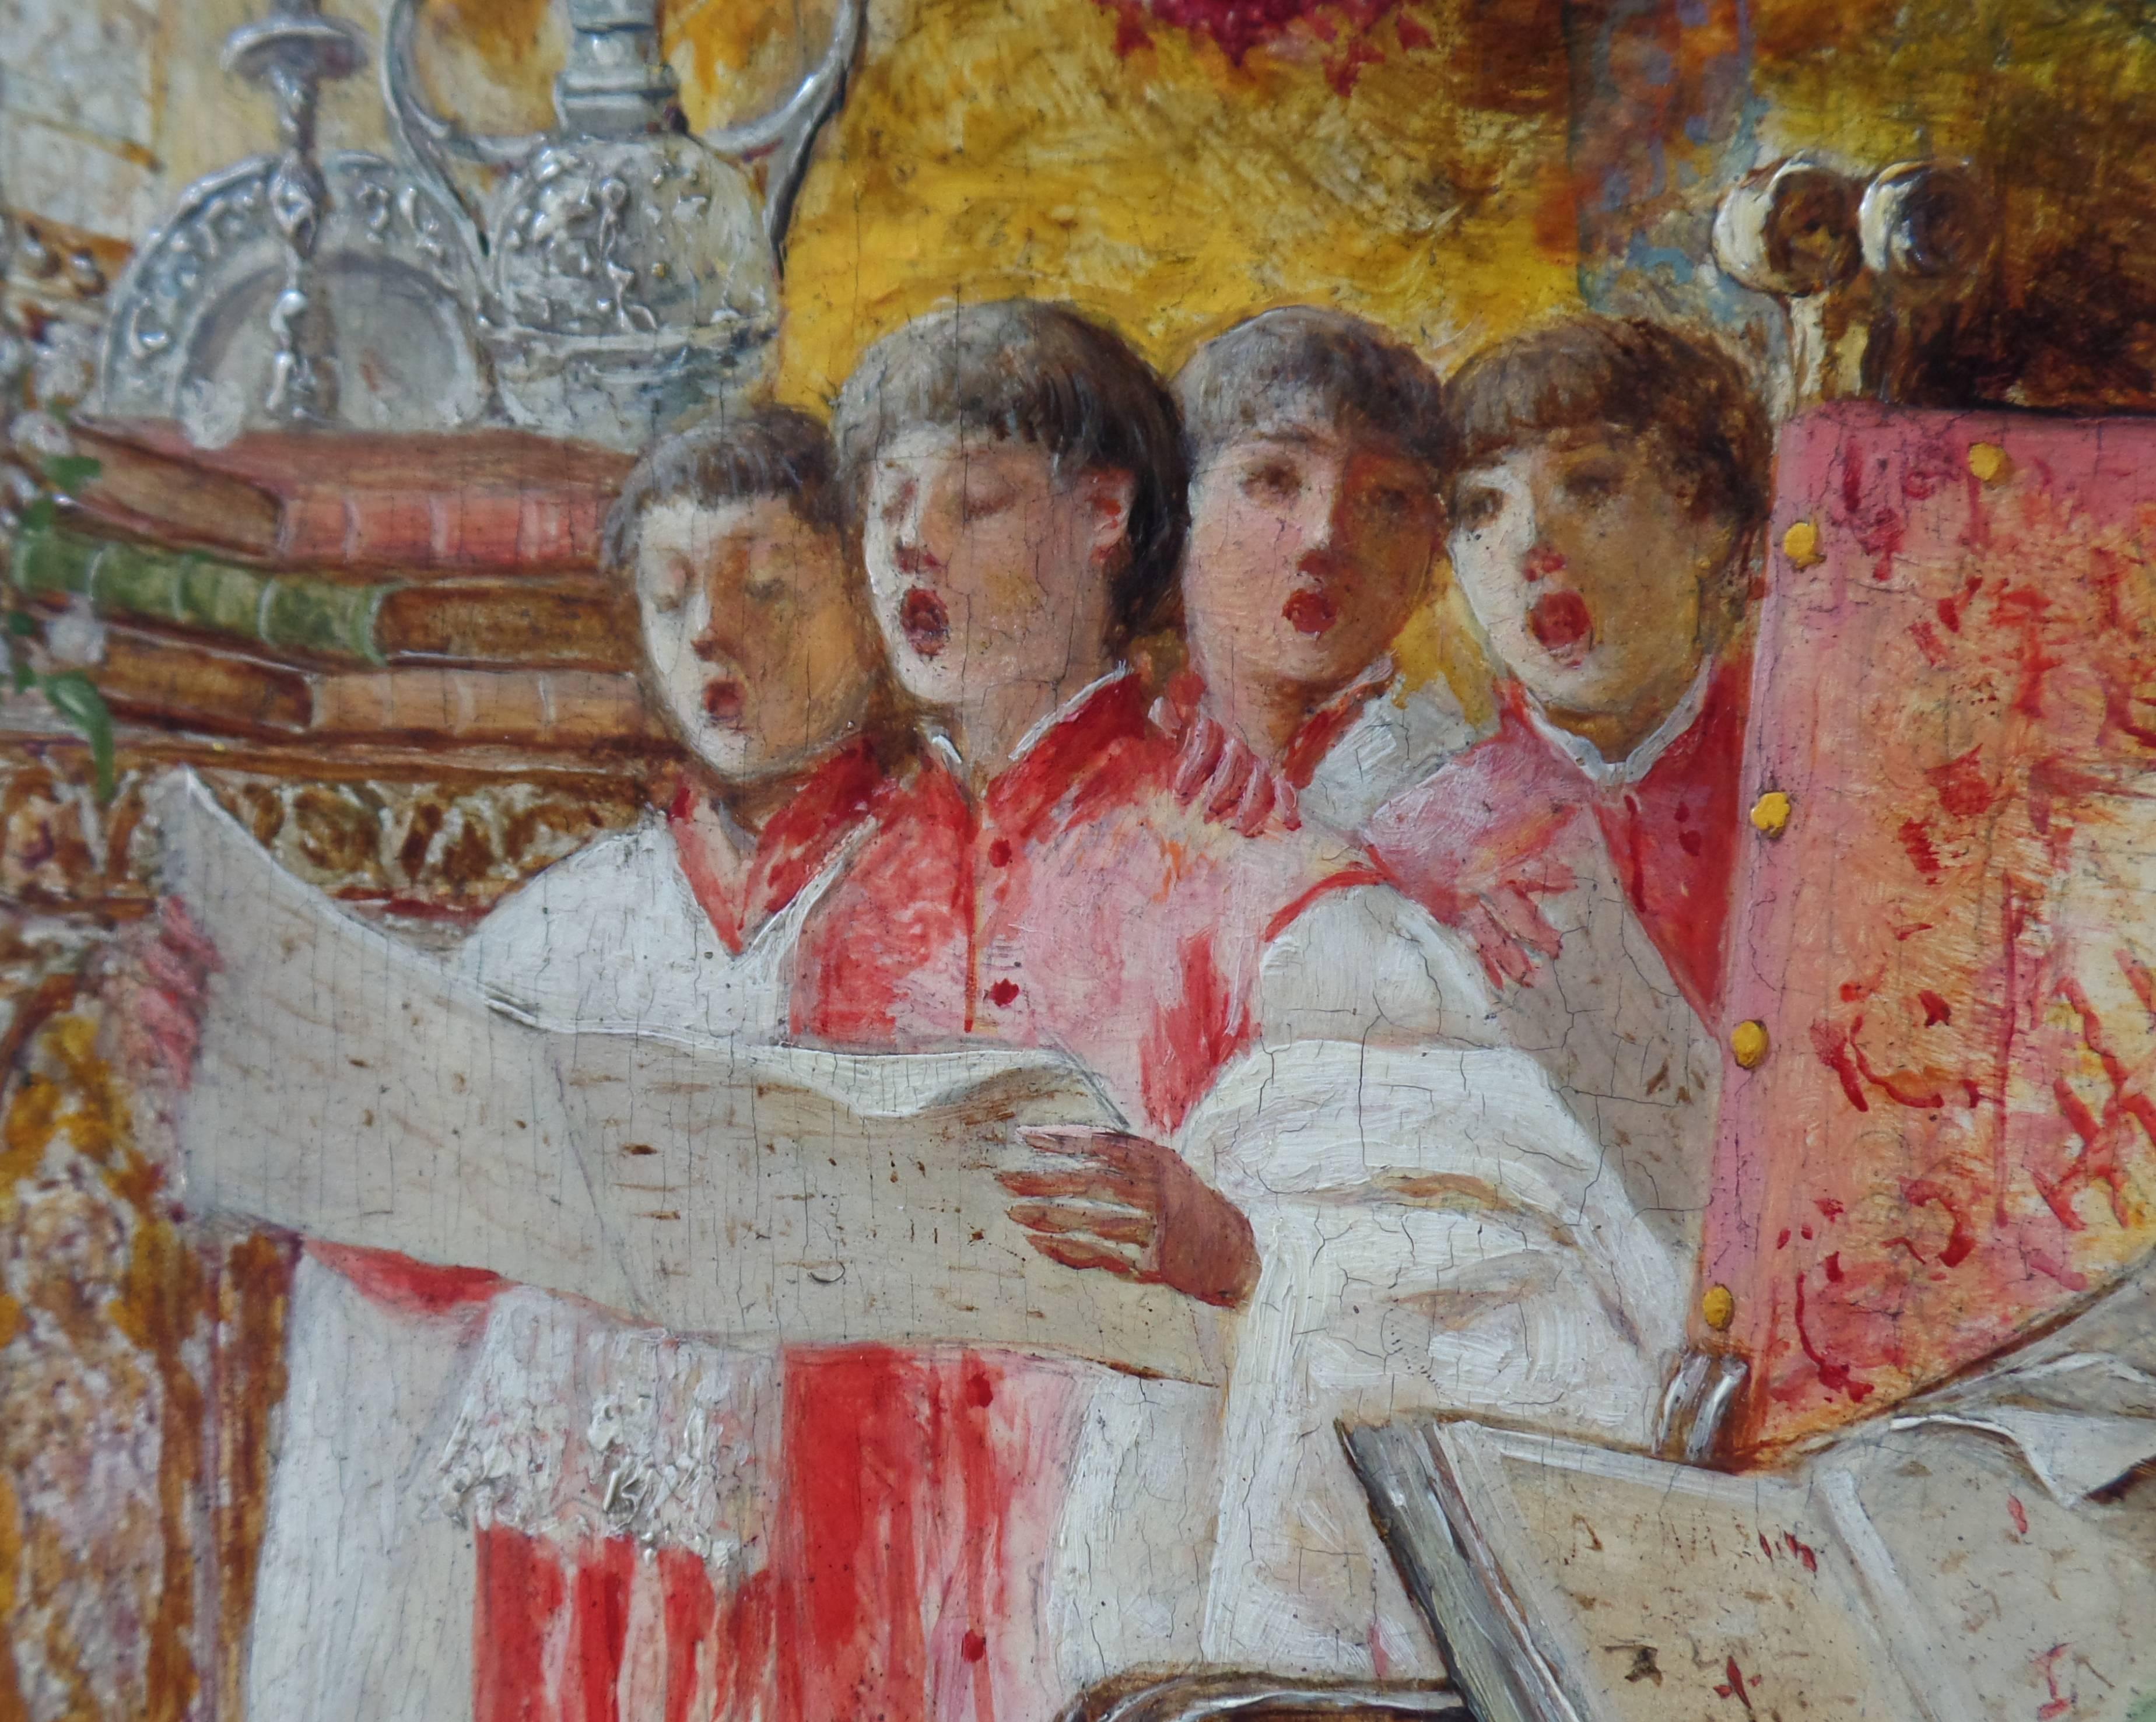 "Choir Boys" oil painting on a panel depicts a group of four robed choir boys singing in an ecclesiastical setting.

Pastel coloration highlight the grandeur of the Catholic Church.

Signed Antonio Rivas (Spanish,